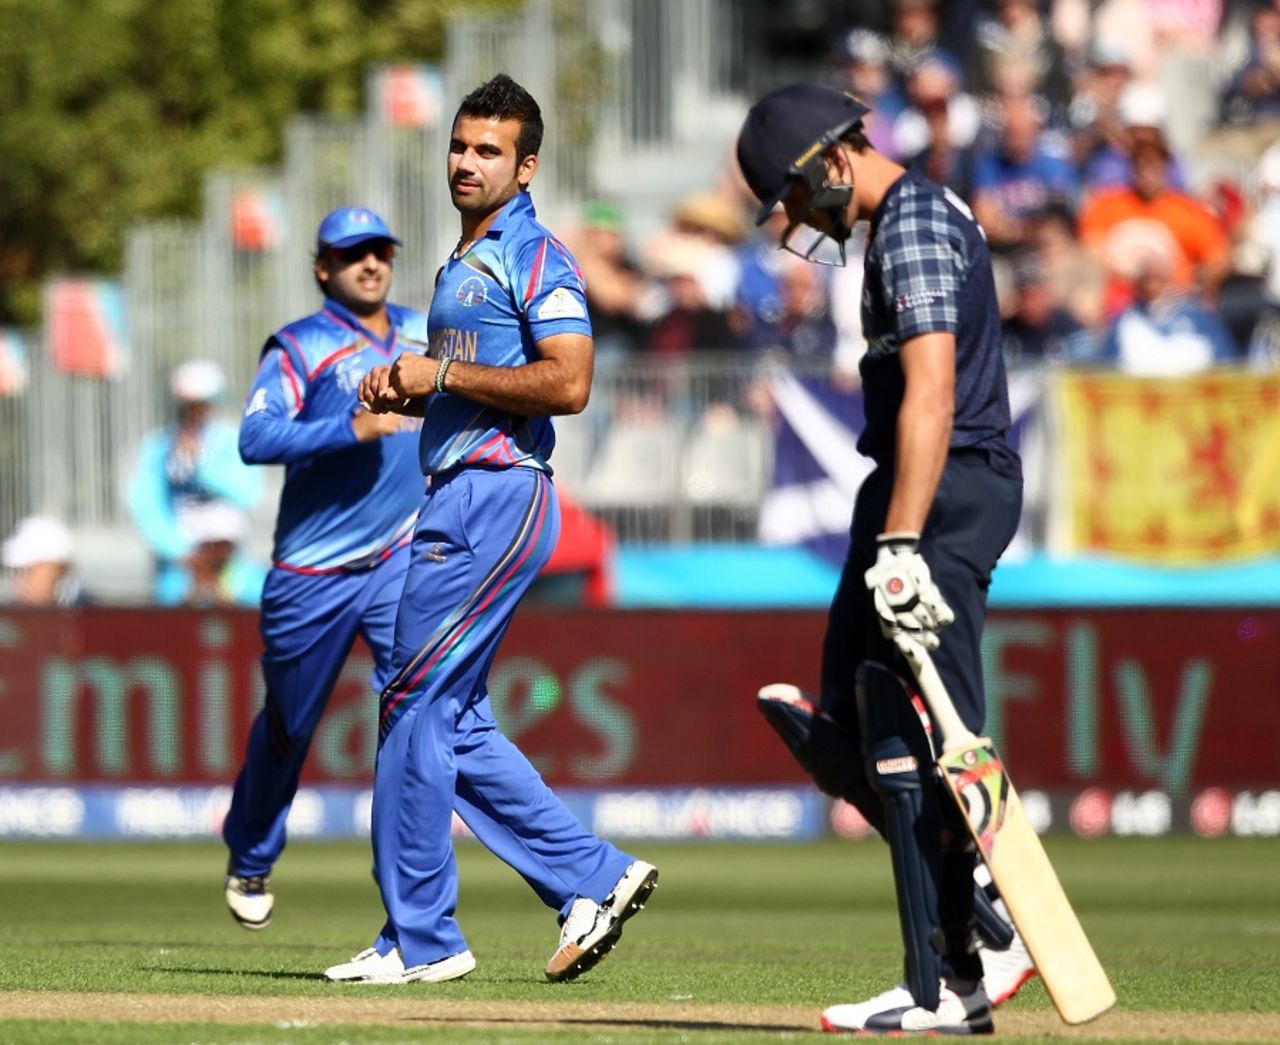 Dawlat Zadran struck in his first over to dismiss  Calum MacLeod for a duck, Afghanistan v Scotland, World Cup 2015, Group A, Dunedin, February 26, 2015